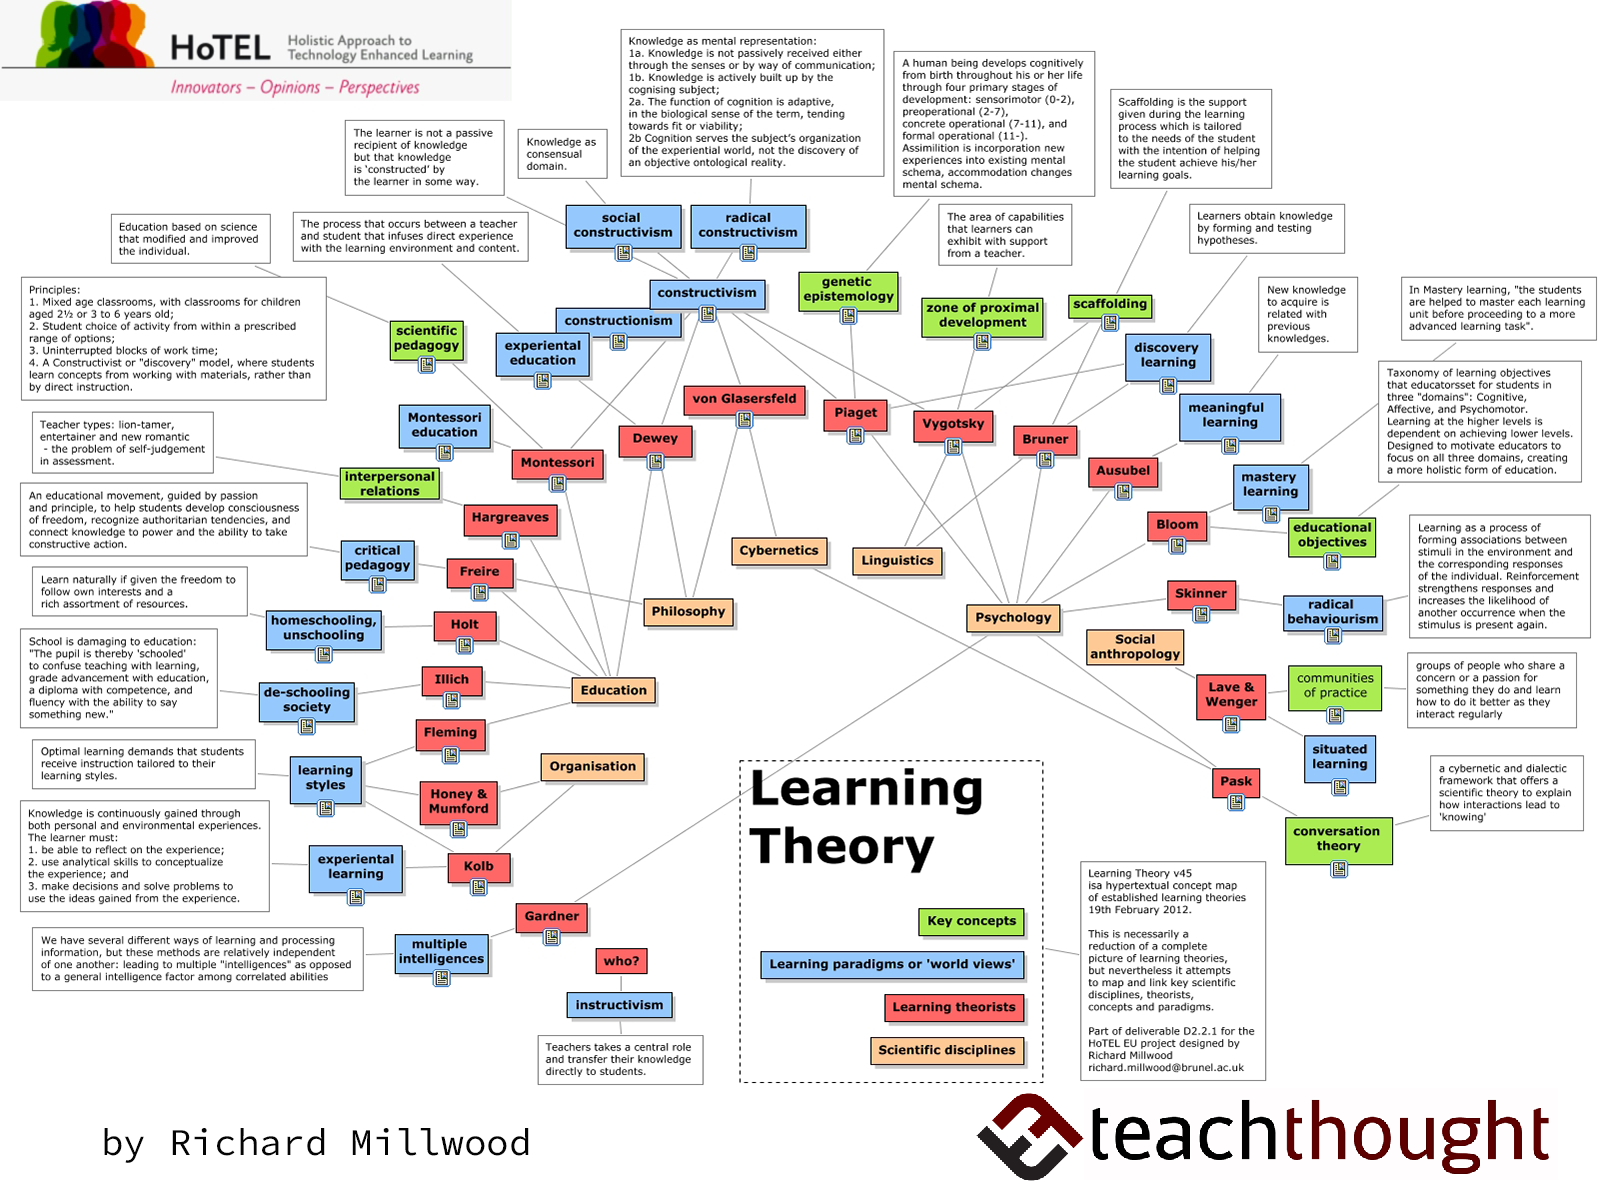 Learning Theories All Teachers Should Know – Alabama Digital News